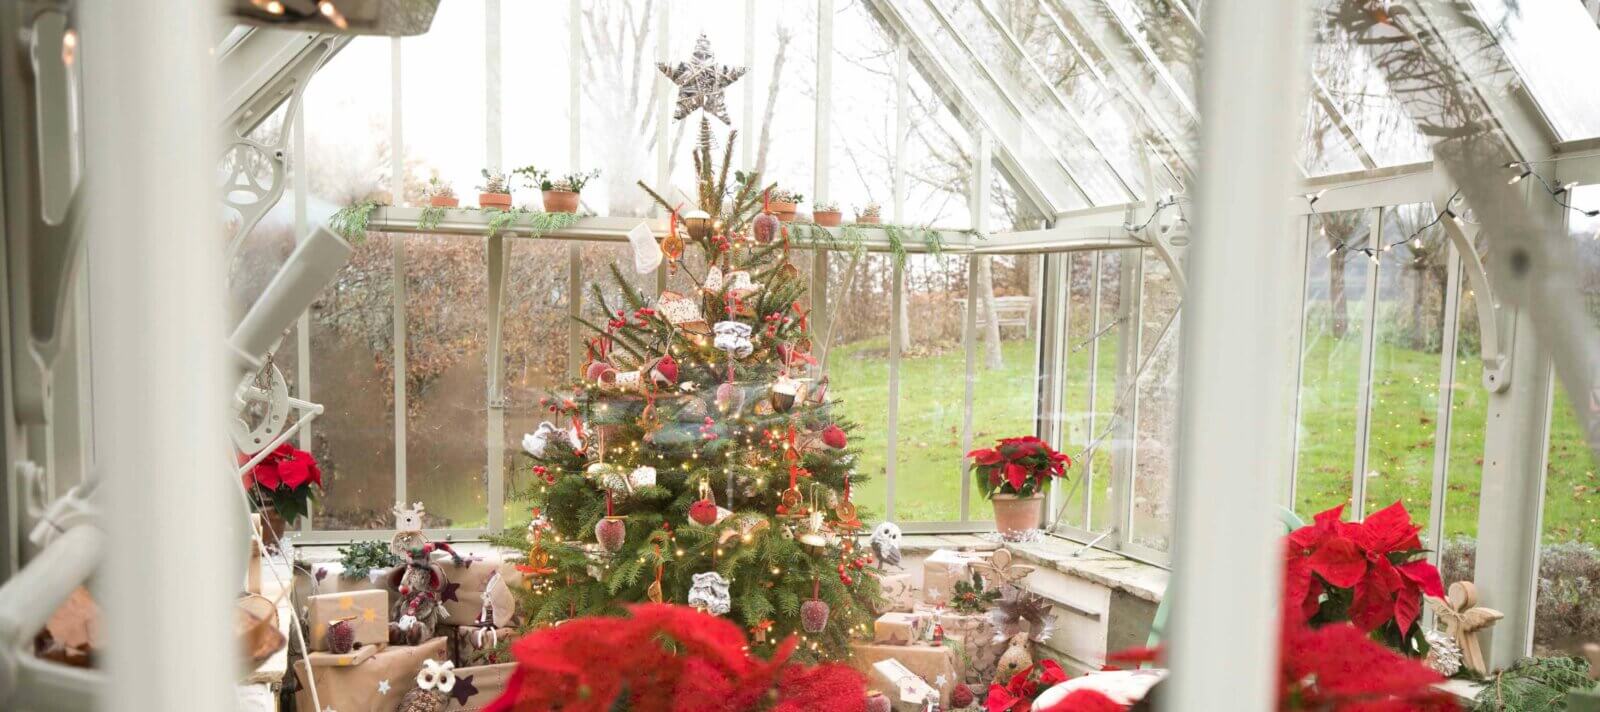 Christmas in an alitex greenhouse